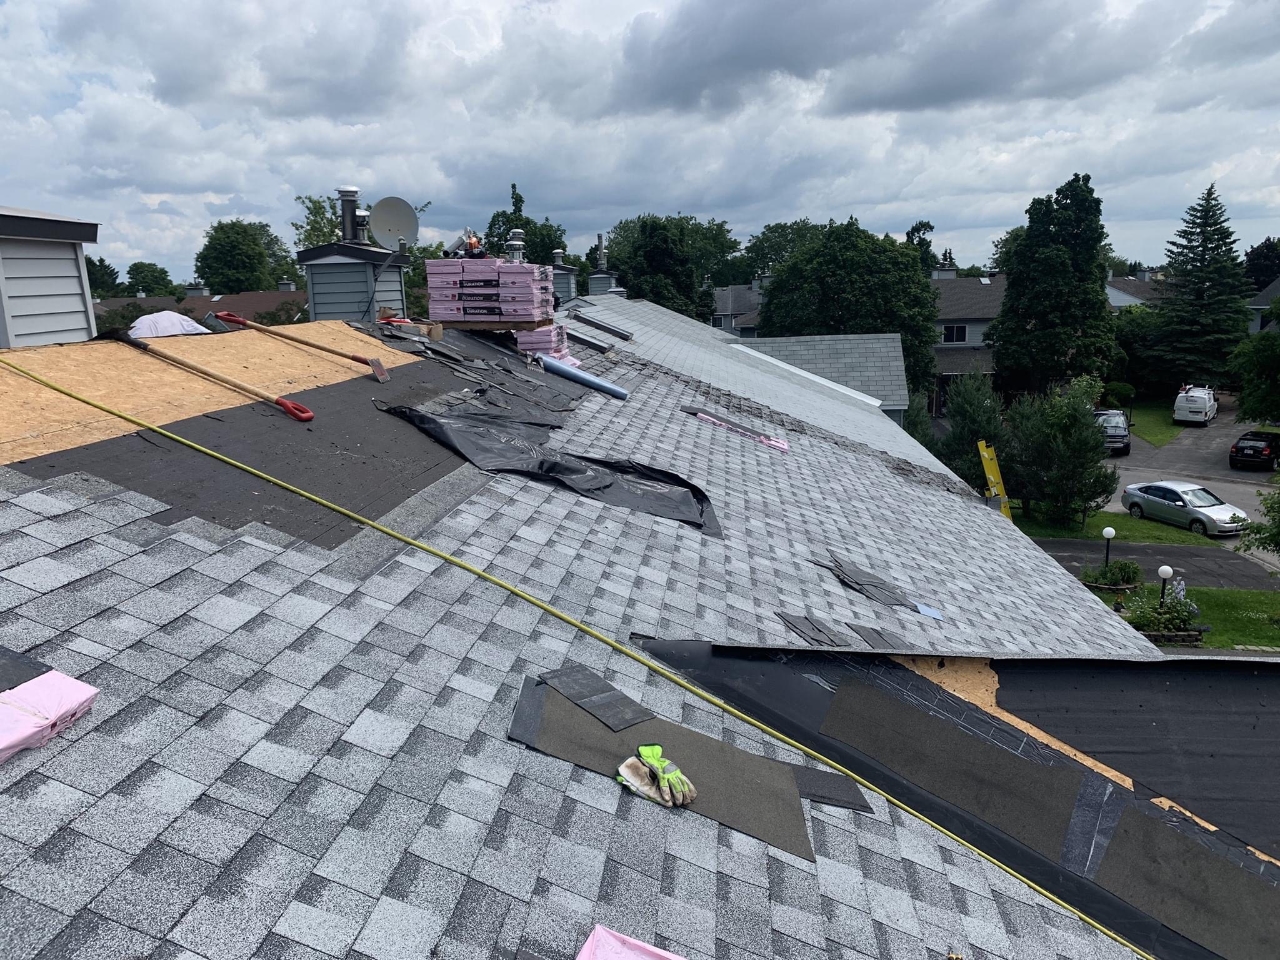 Asphalt roof being replaced.